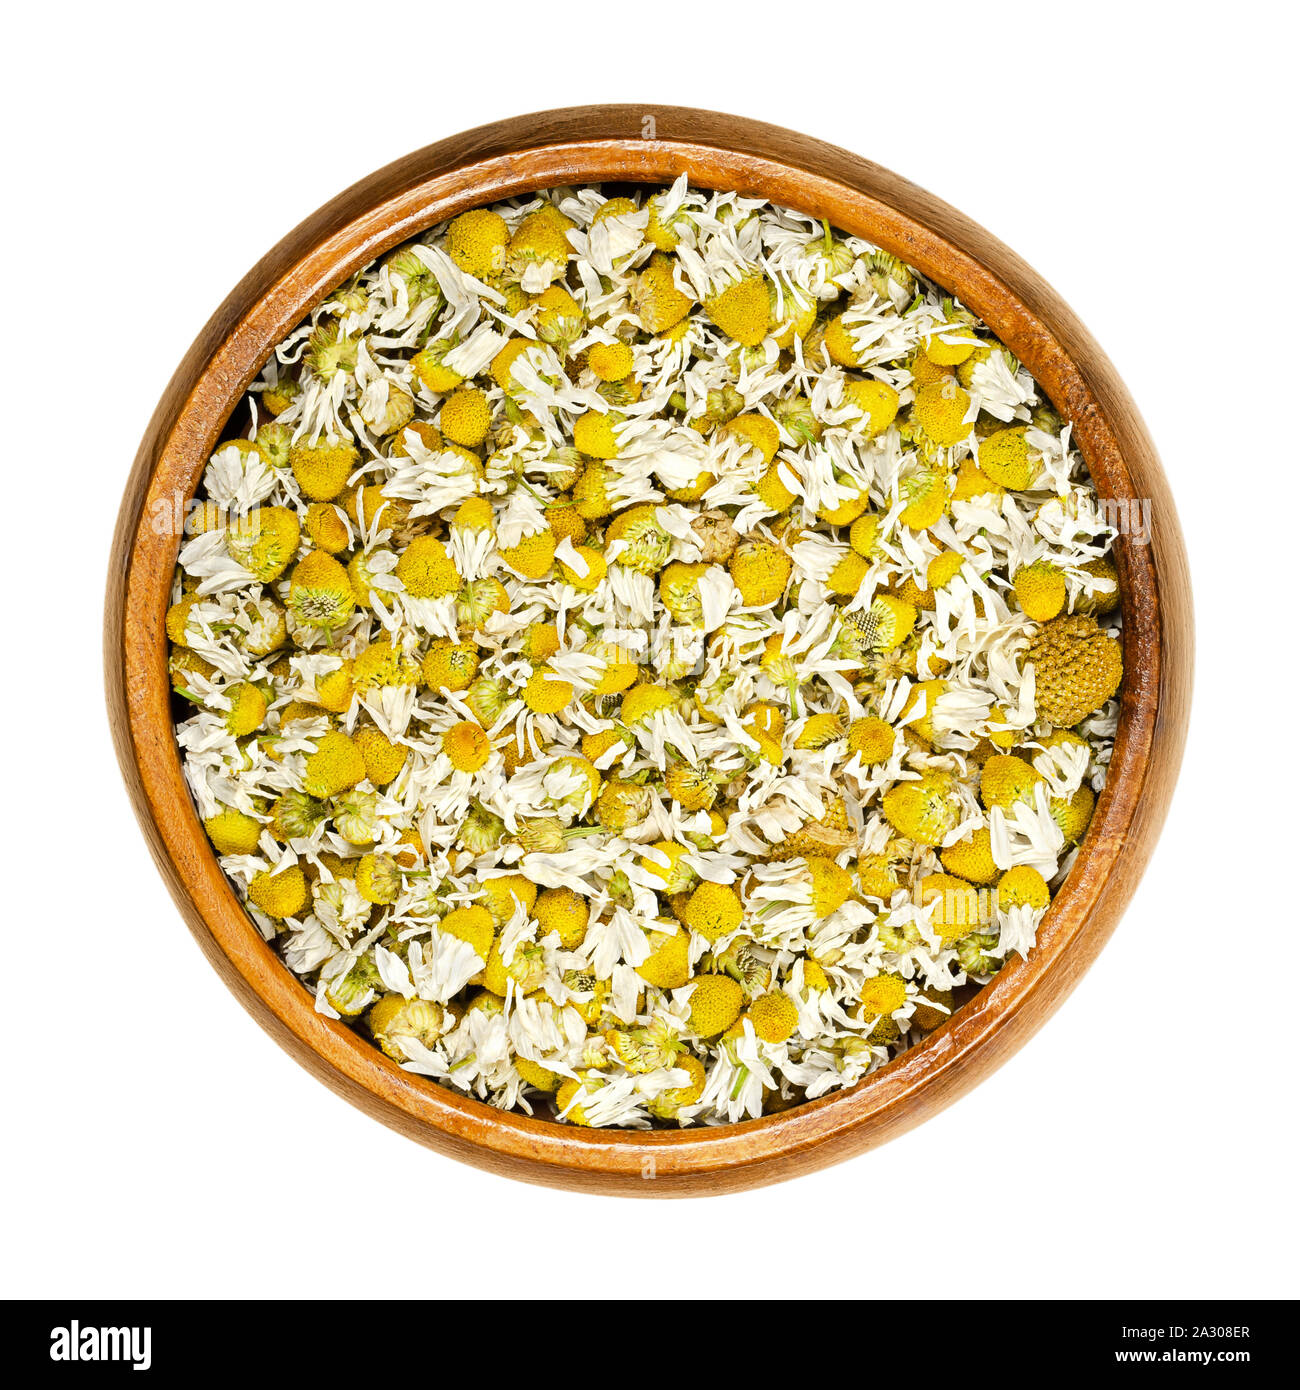 Dried chamomile blossoms in wooden bowl. Camomile tea, flowers of Matricaria chamomilla, used for herbal infusions and in traditional medicine. Stock Photo